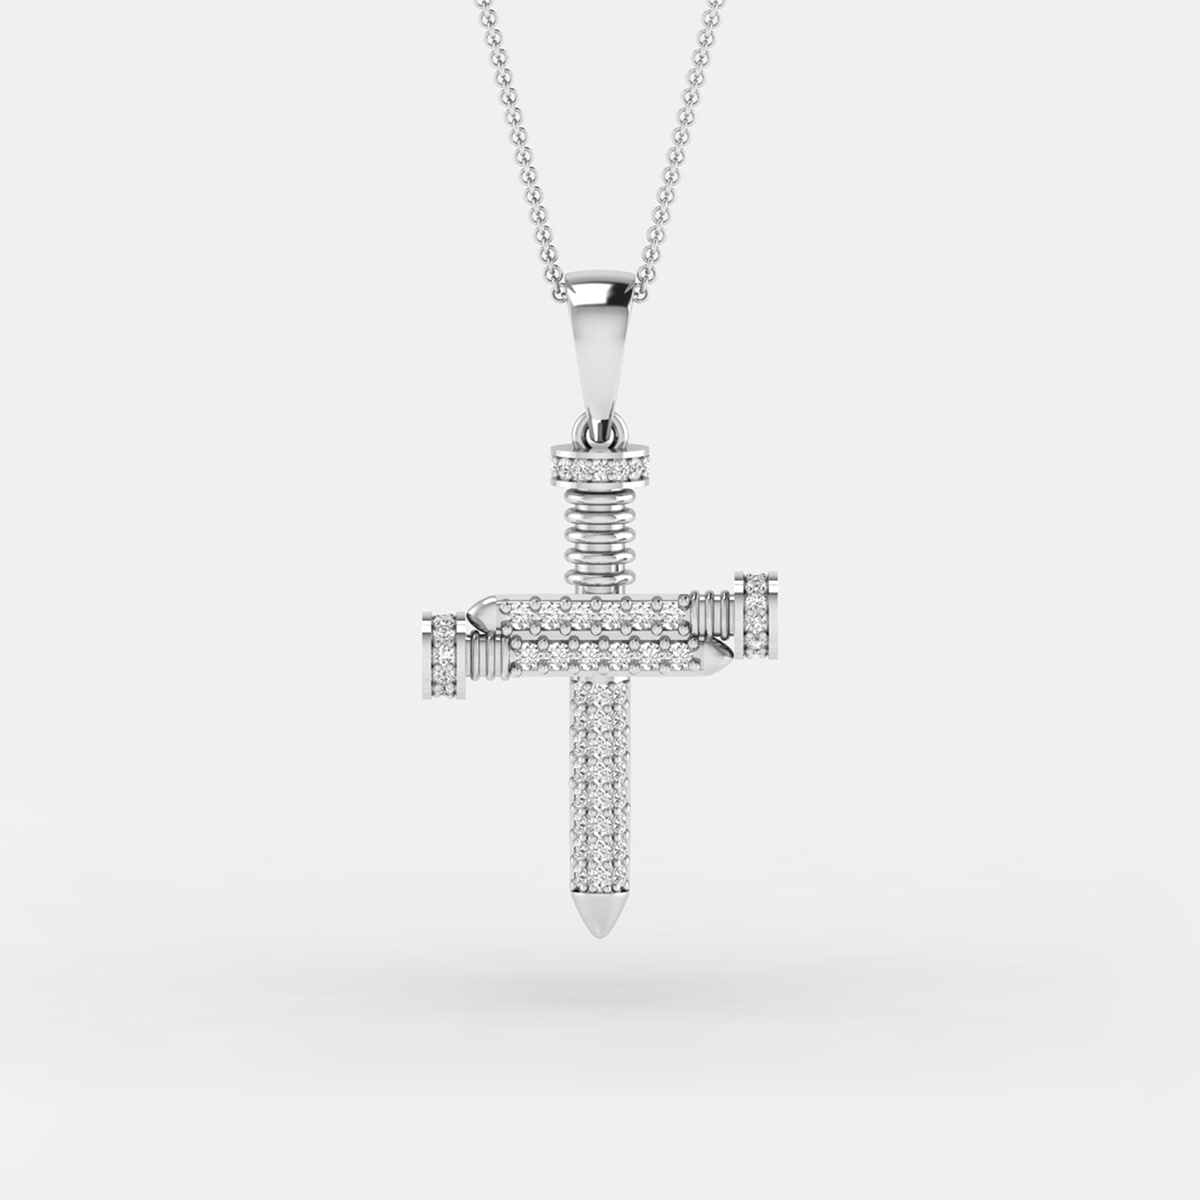 Antique Nail Cross Necklace In Pewter – Forgiven Jewelry